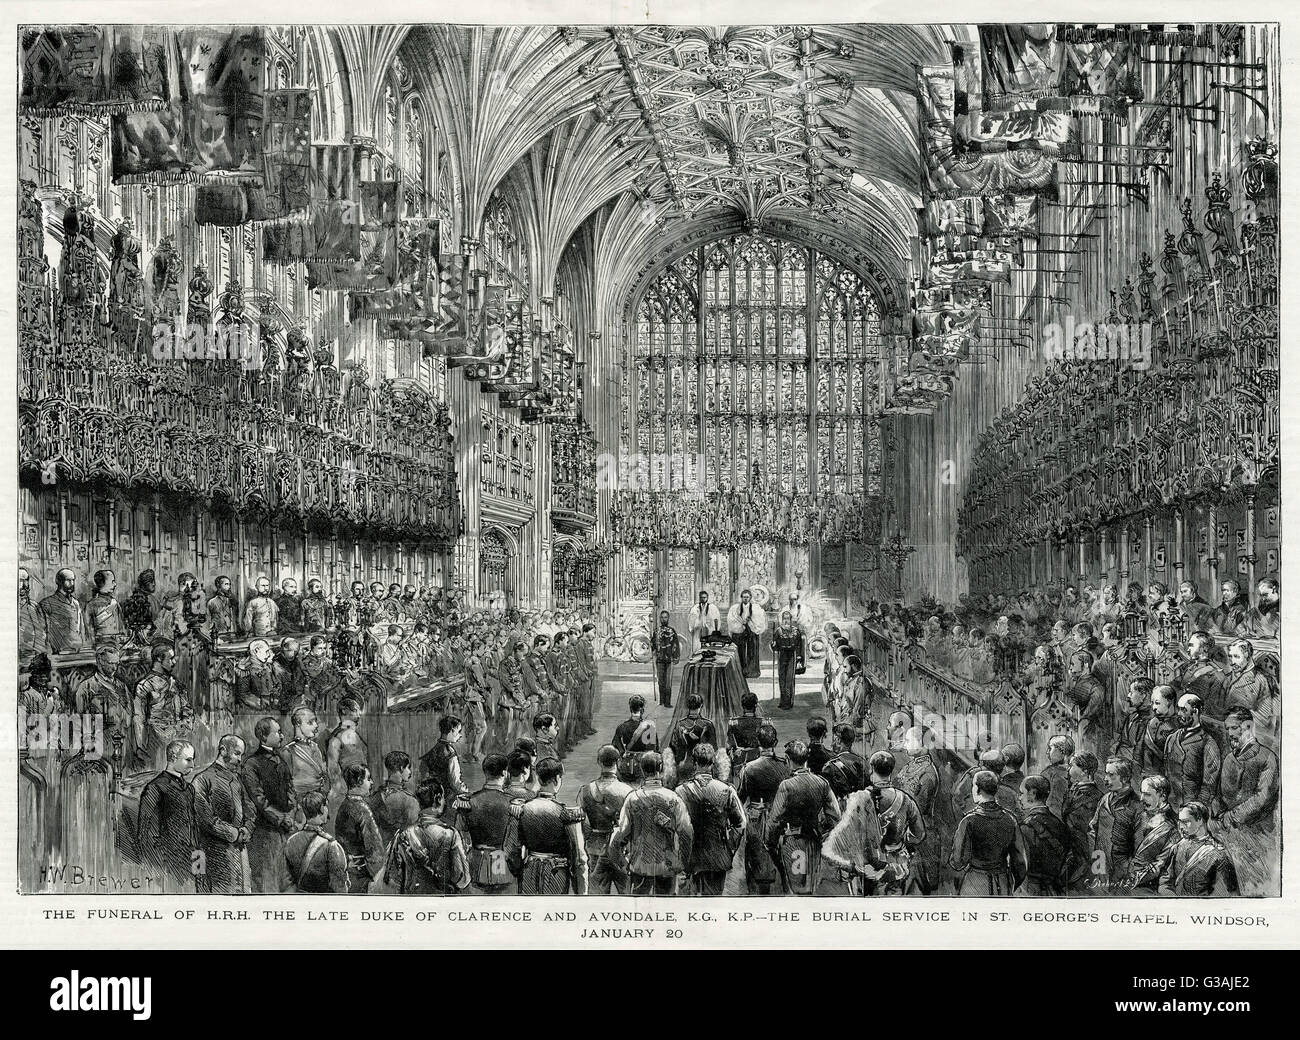 Prince Albert Victor's, funeral service in St George chapel Winsor, London.  Prince Albert Victor was the eldest son of Edward VII, who fell ill with influenza in the great influenza pandemic of 188992, then developed pneumonia and died.     Date: 20 Janu Stock Photo